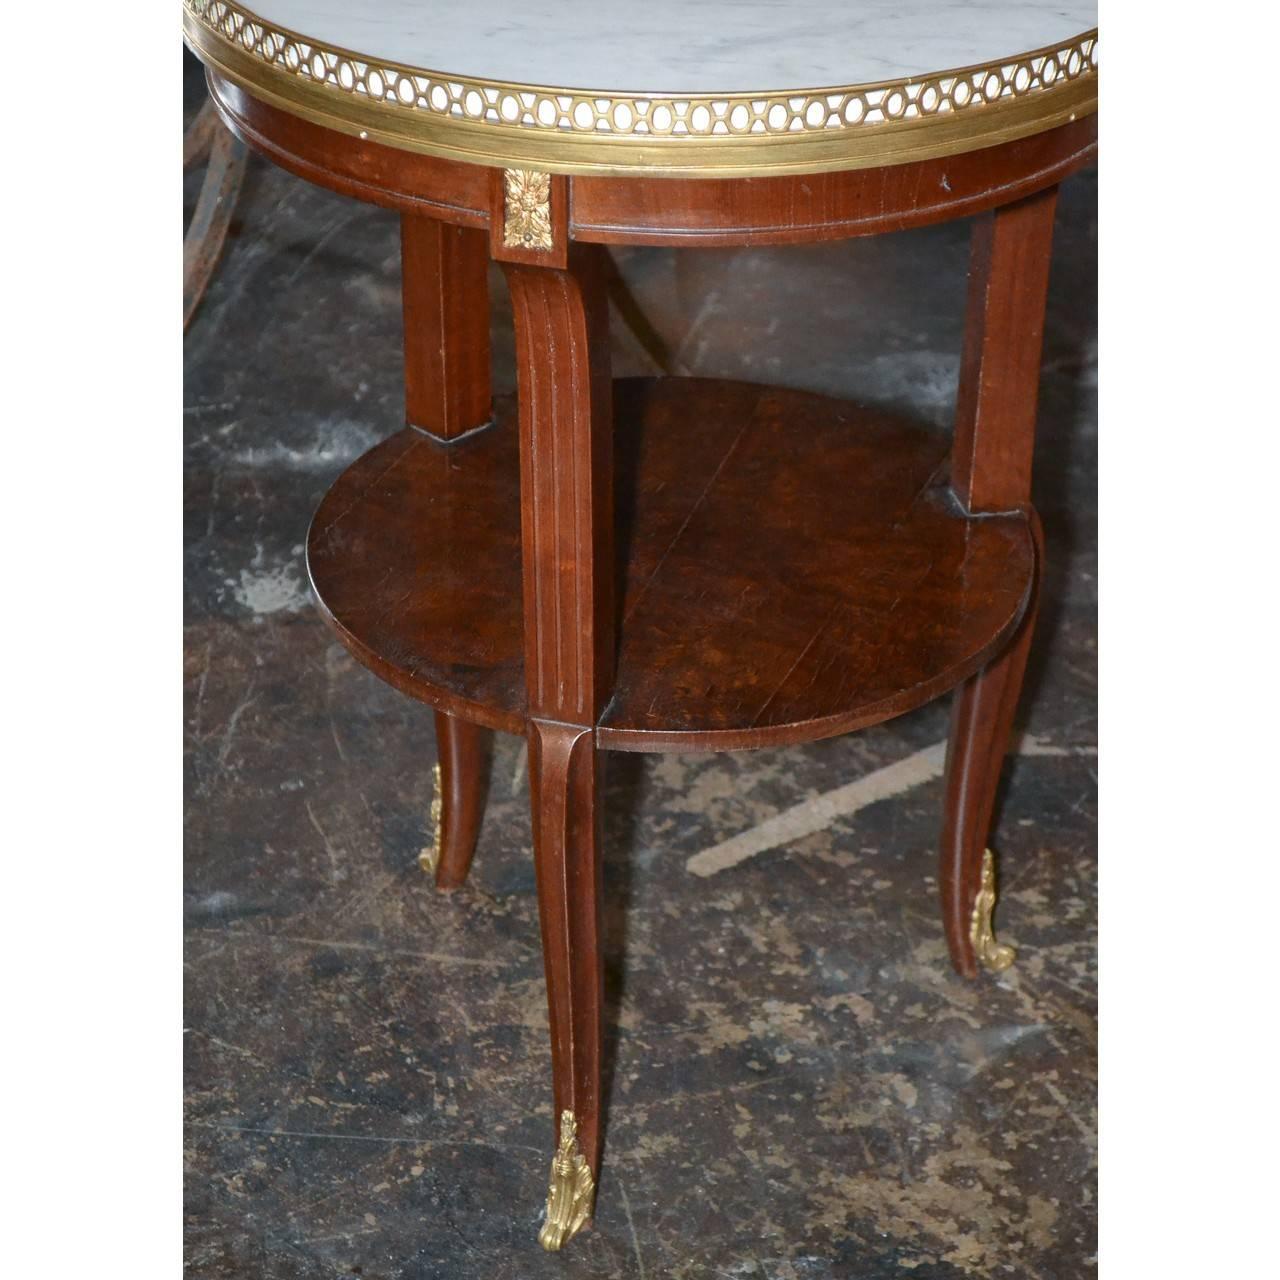 Attractive French Louis XV style mahogany salon, side, or end table with a fine Carrara marble top with filigree brass gallery, bronze accents, lower tier and superbly cast bronze acanthus leaf sabots,

circa 1900.